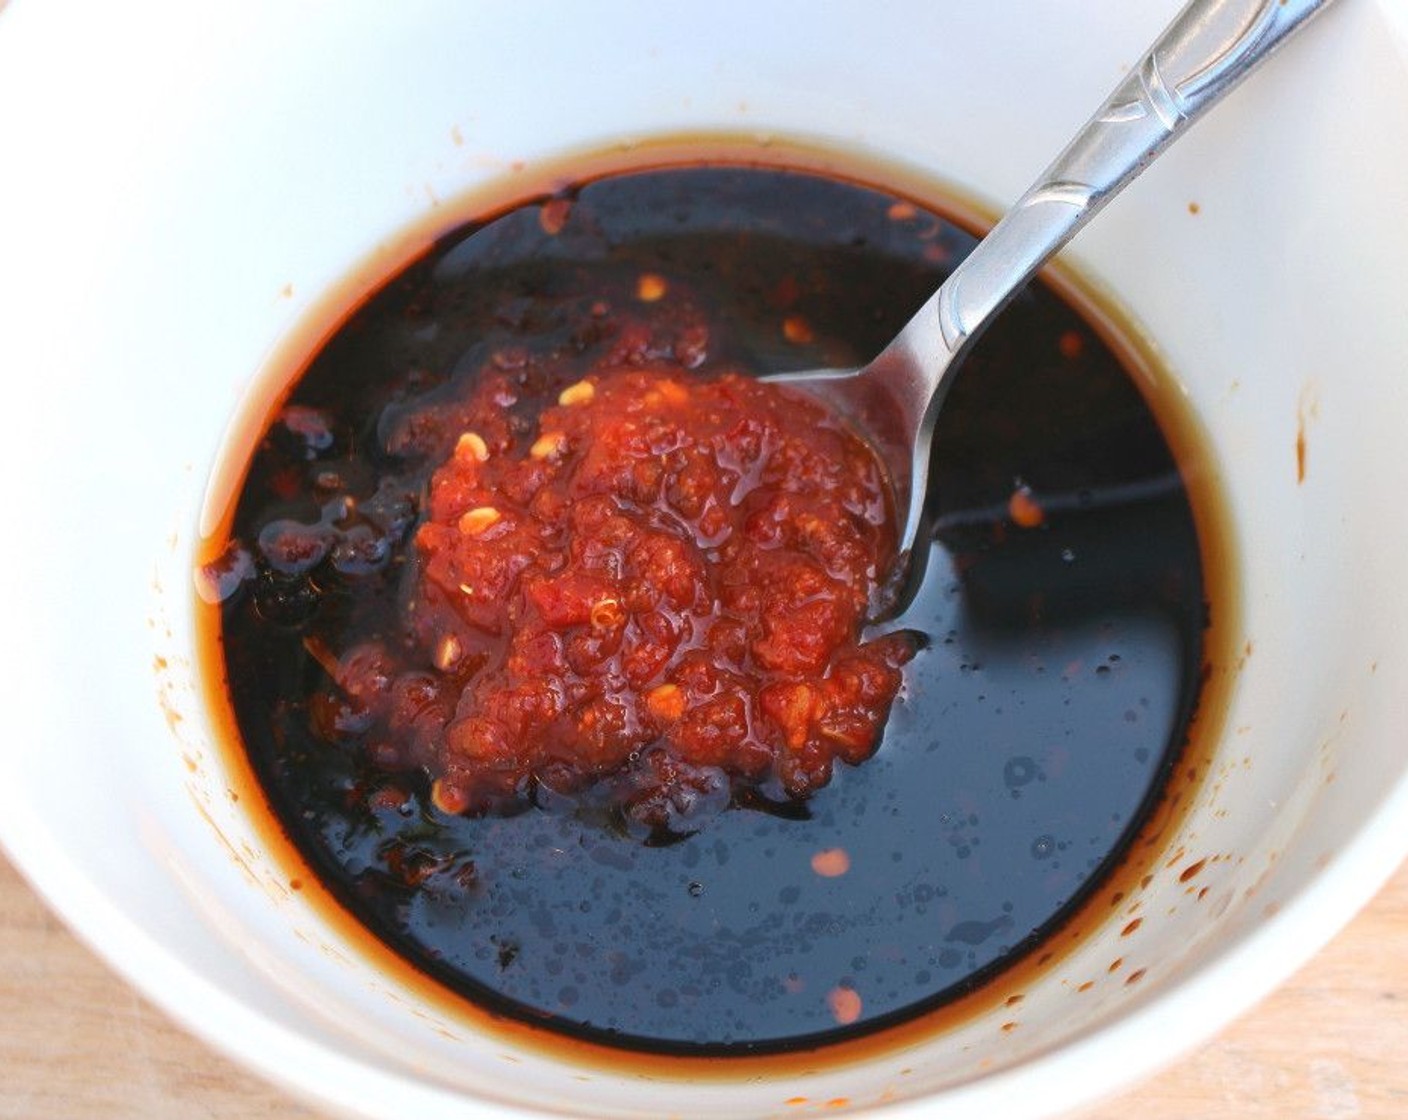 step 3 Into a mixing bowl, add Soy Sauce (1/3 cup), Hoisin Sauce (1/3 cup), Shaoxing Cooking Wine (1/3 cup), Chili Paste (1 Tbsp), Brown Sugar (1 Tbsp), Garlic Paste (1 Tbsp), Corn Starch (1 Tbsp), and Fresh Ginger (1/2 Tbsp). Stir well to combine.